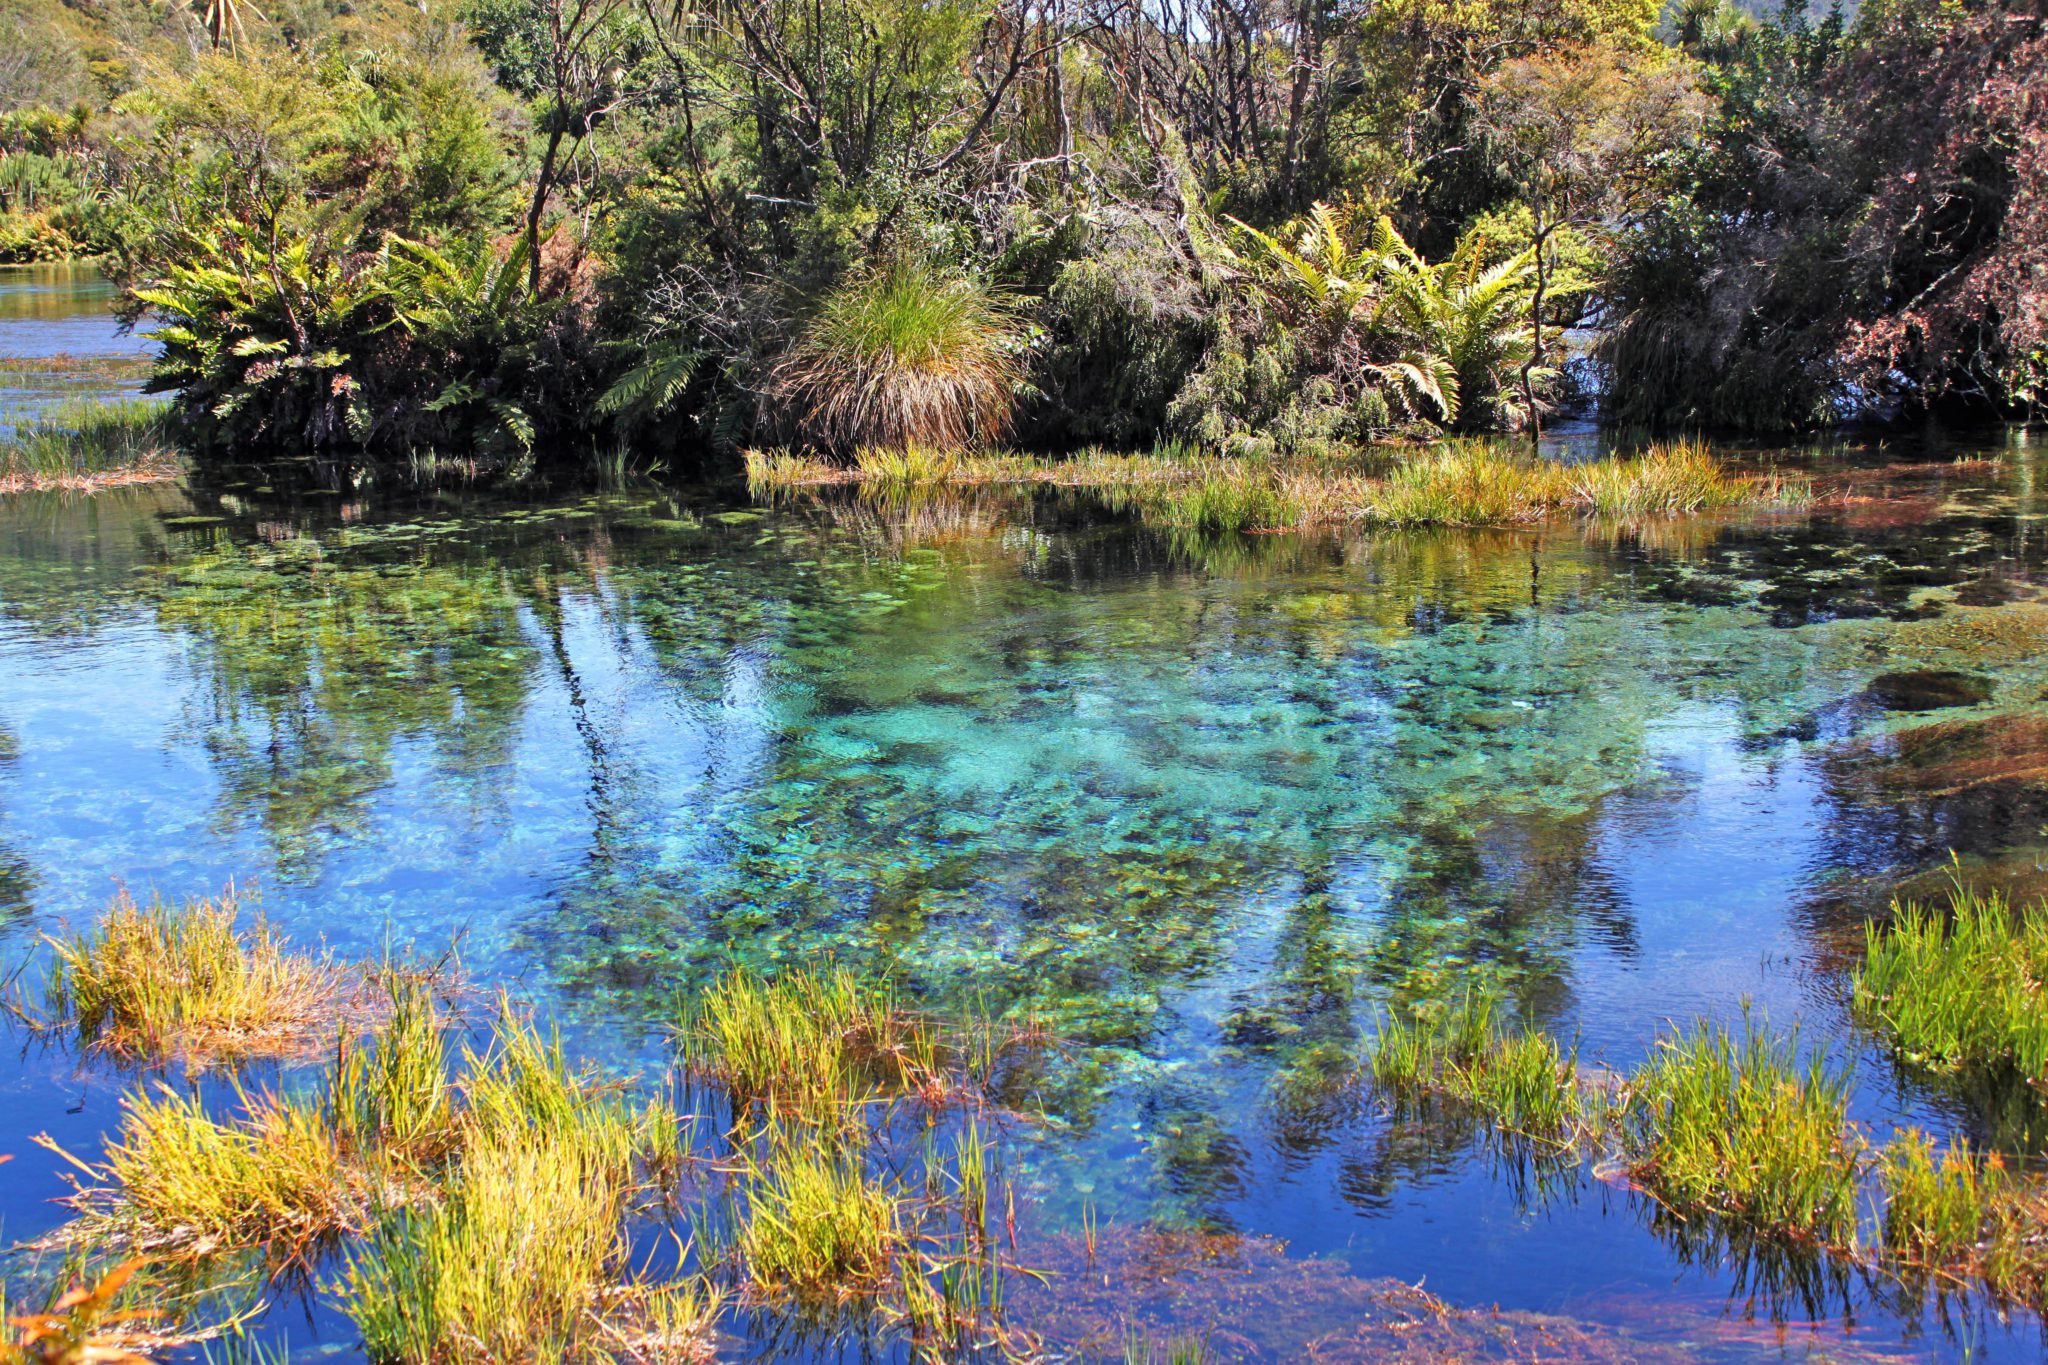 New Zealand's Te Waikoropupu Springs is the second most optically pure water found in the world | 10 Must see locations at Golden Bay New Zealand #goldenbay #newzealand #tewaikoropupusprings #simplywander